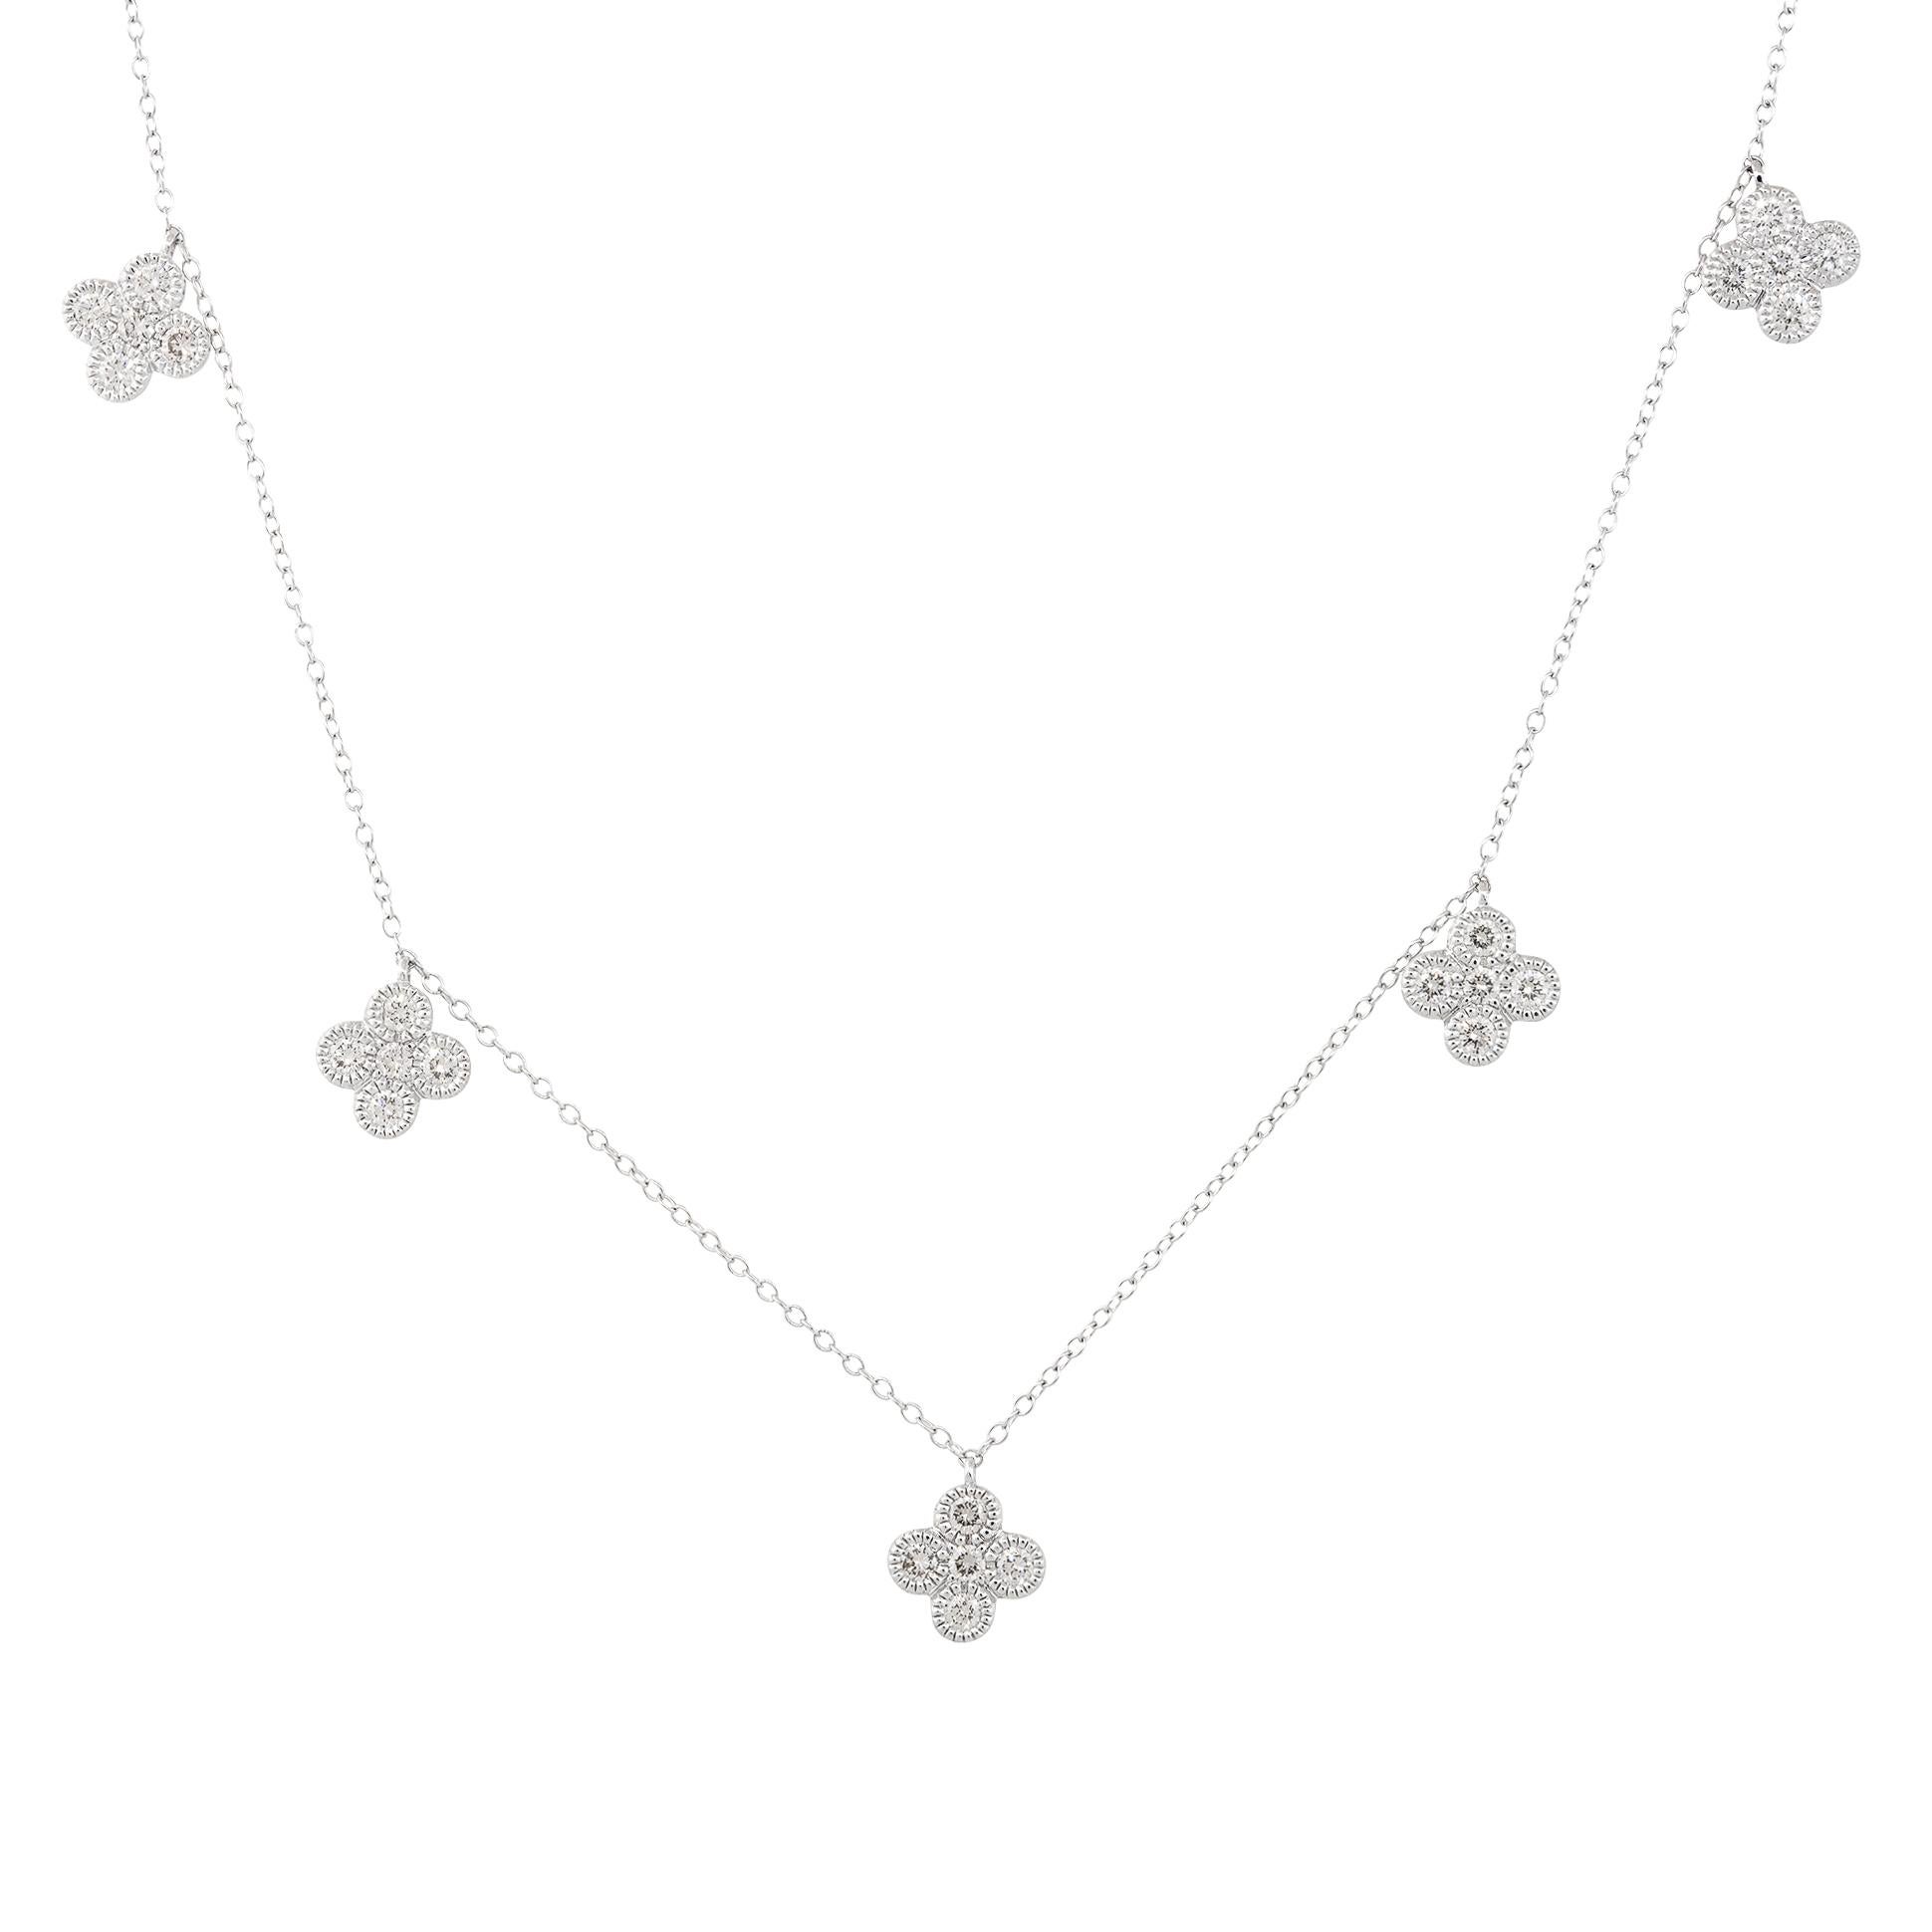 14k White Gold 1.05ctw Flower Diamond Station Necklace

Material: 14k White Gold
Diamond Details: Approximately 1.05ctw of Round Brilliant Diamonds pave set onto 5 flower stations along the necklace. Each station has 5 large diamonds and multiple